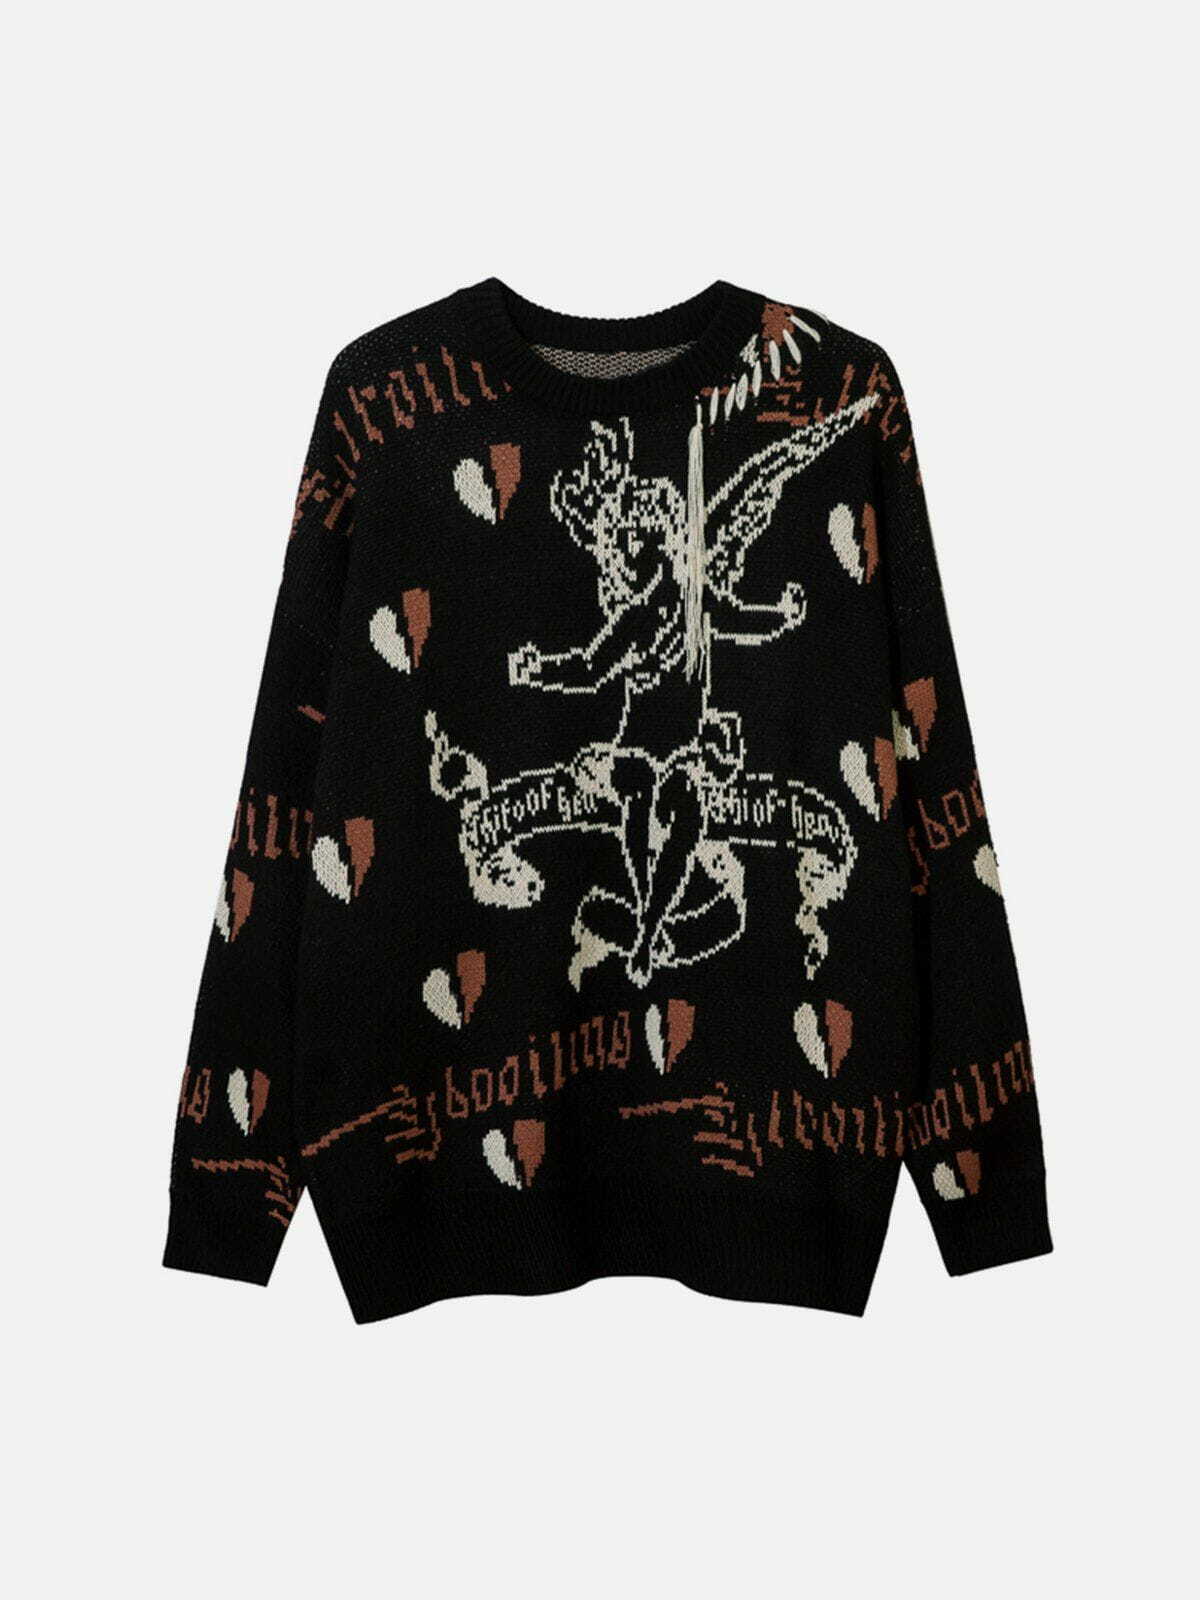 cupid embroidered sweater romantic & chic streetwear 5316